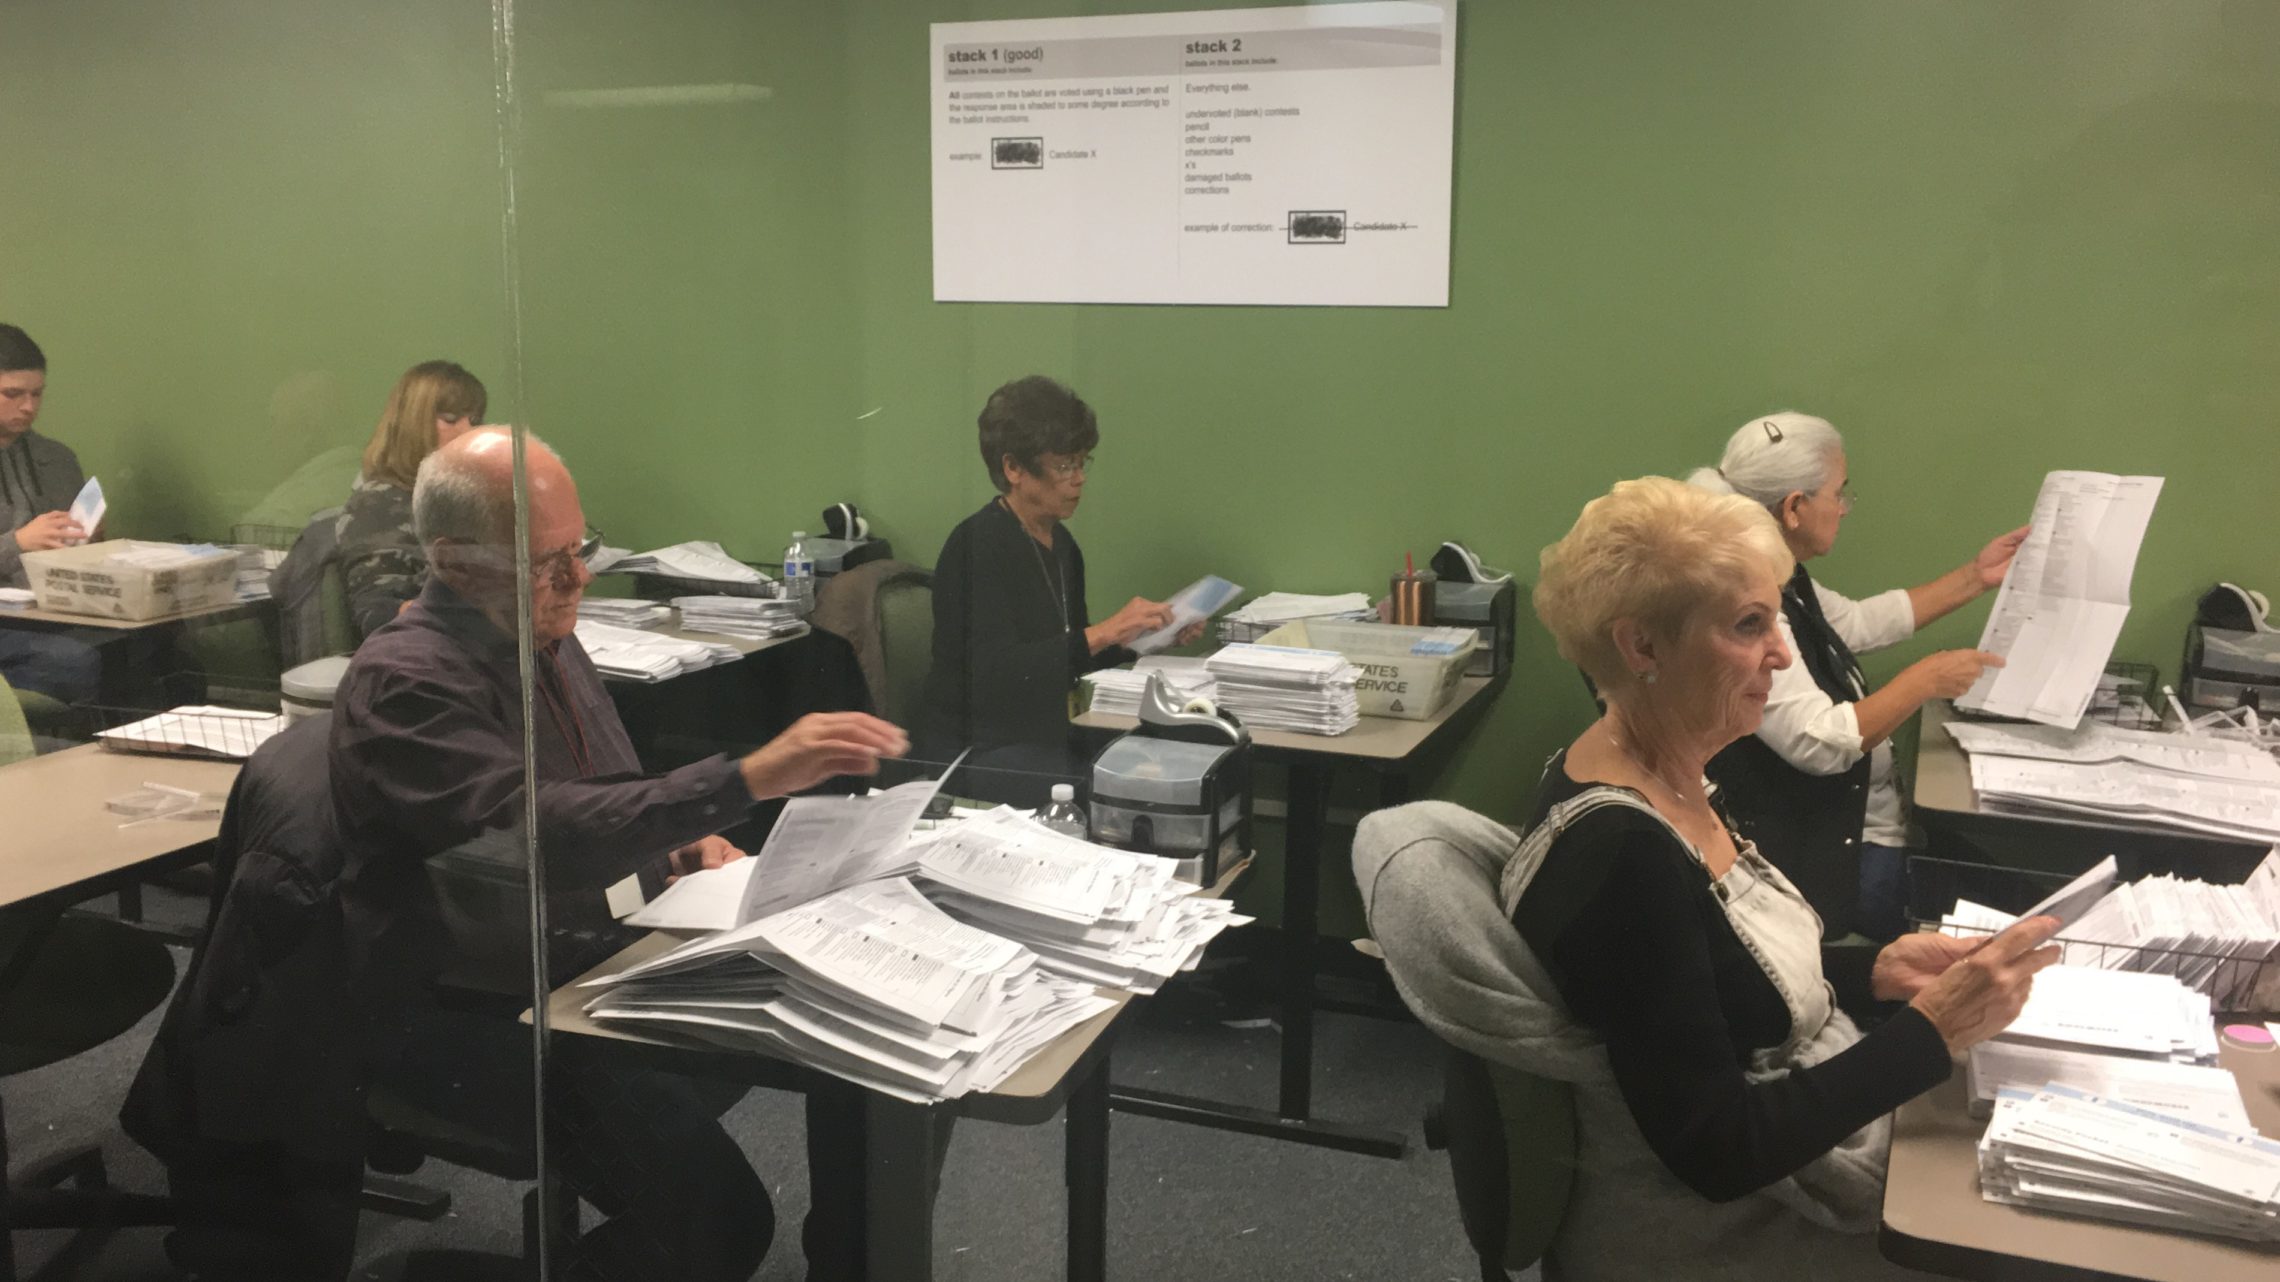 Workers in the Yakima County Elections Office work to open ballots and verify information. Their work is done within public view behind a glass wall, for anyone to monitor. CREDIT: ESMY JIMENEZ/NWPB